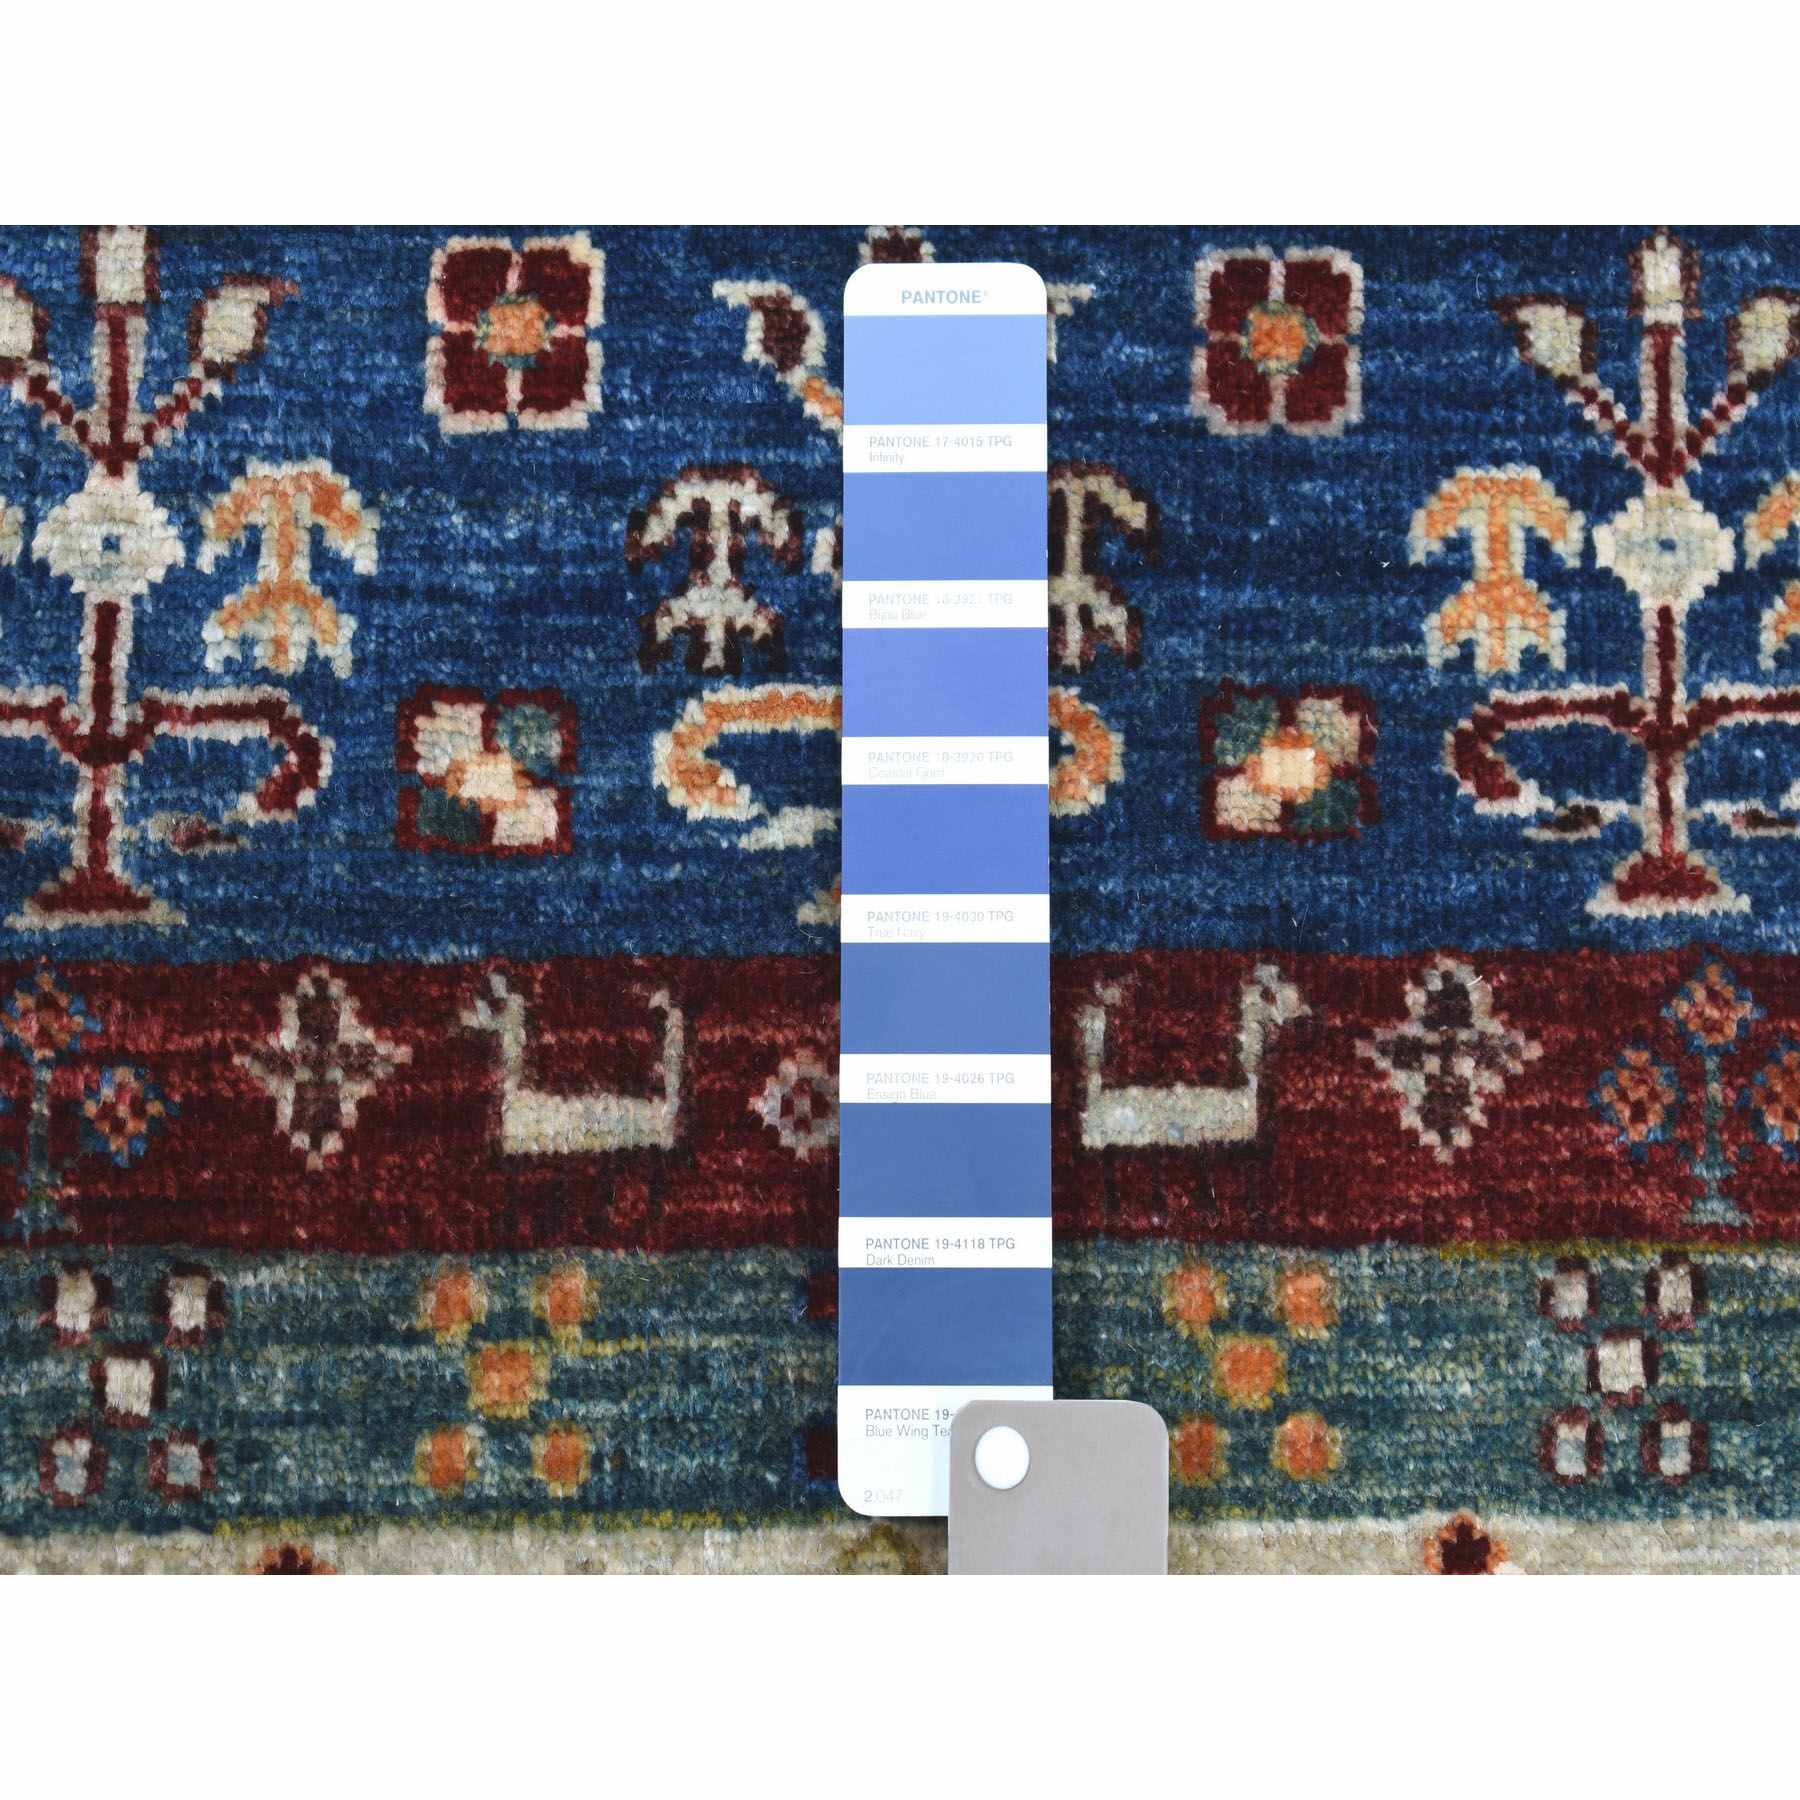 2-7 x9-9  Colorful Kashkuli Gabbeh Pure Wool Hand Knotted Runner Oriental Rug 